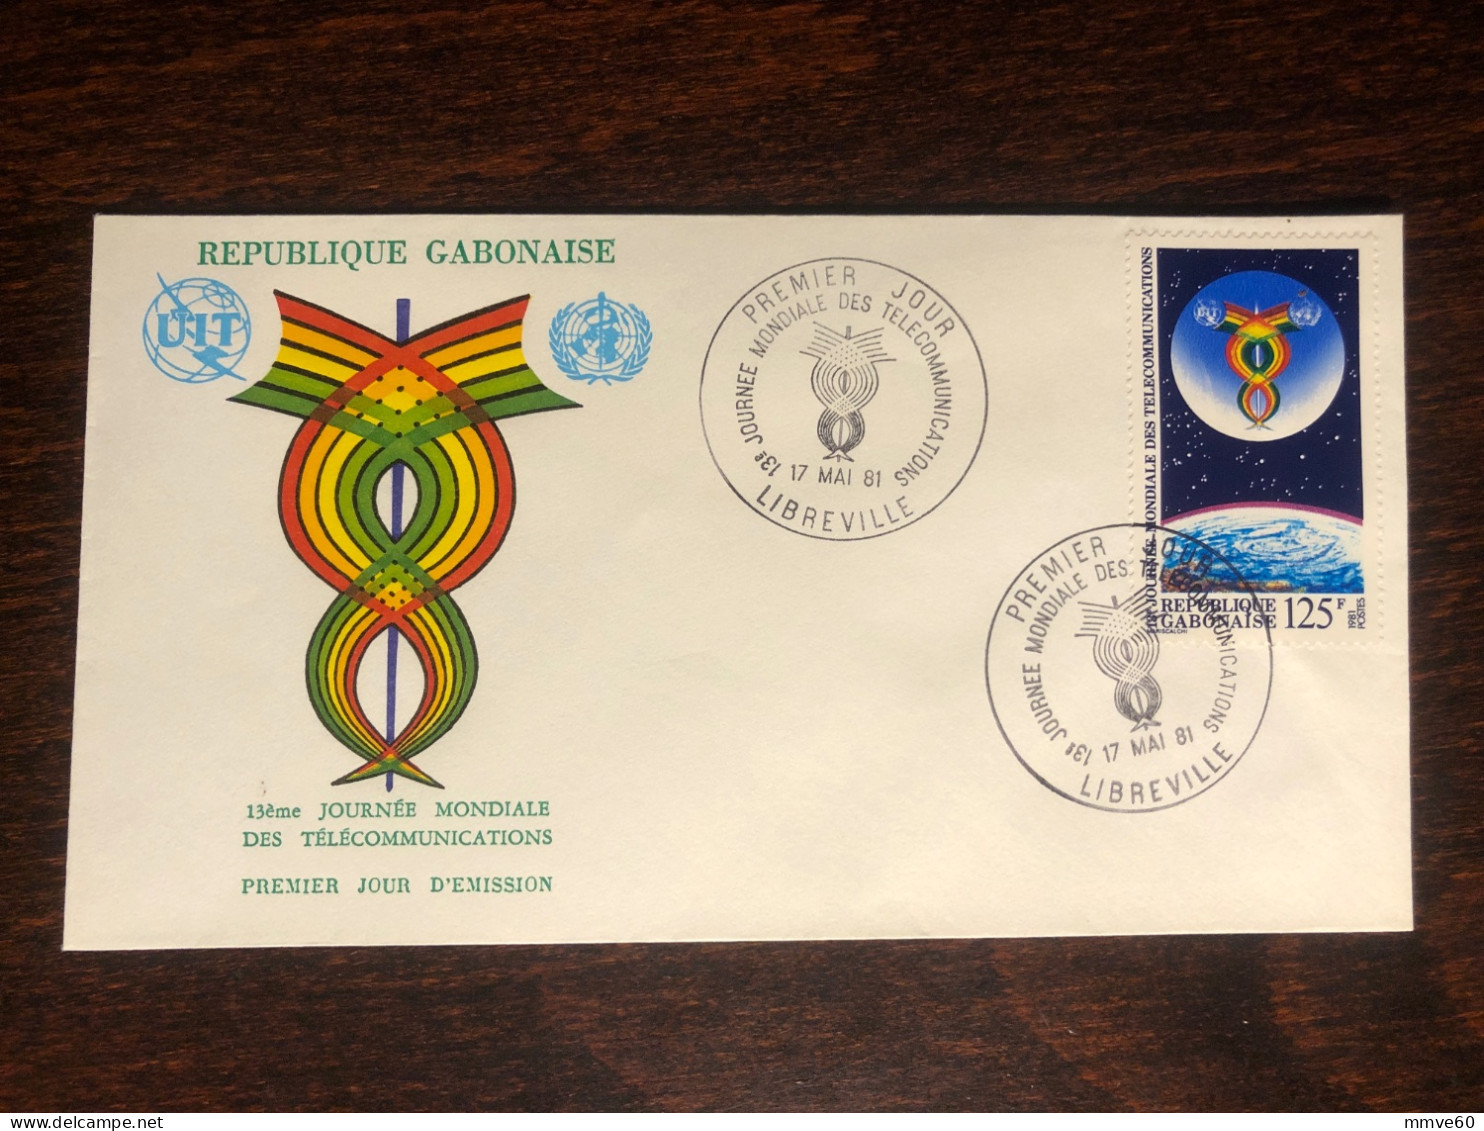 GABON FDC COVER 1981 YEAR TELECOMMUNICATIONS AND HEALTH MEDICINE STAMPS - Gabun (1960-...)